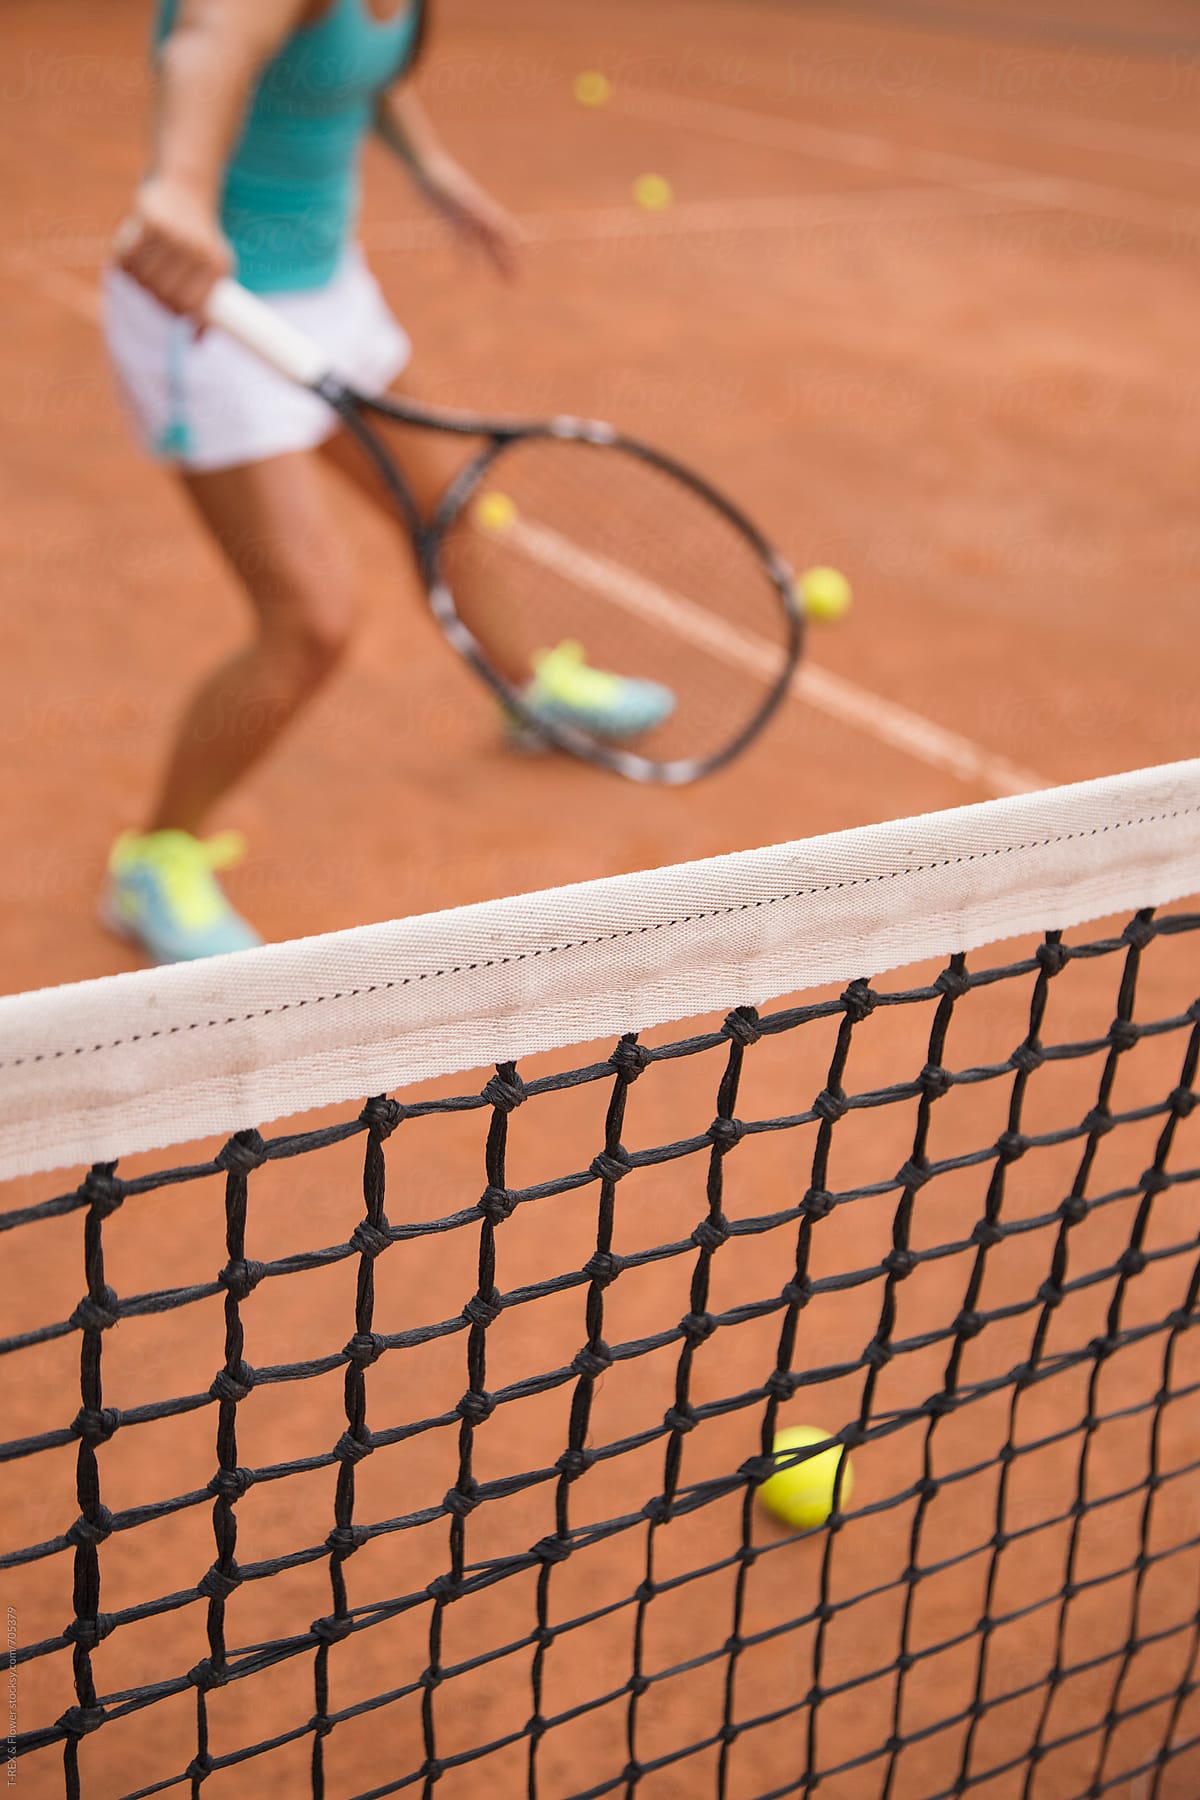 Closeup of the tennis net and silhouette of the player